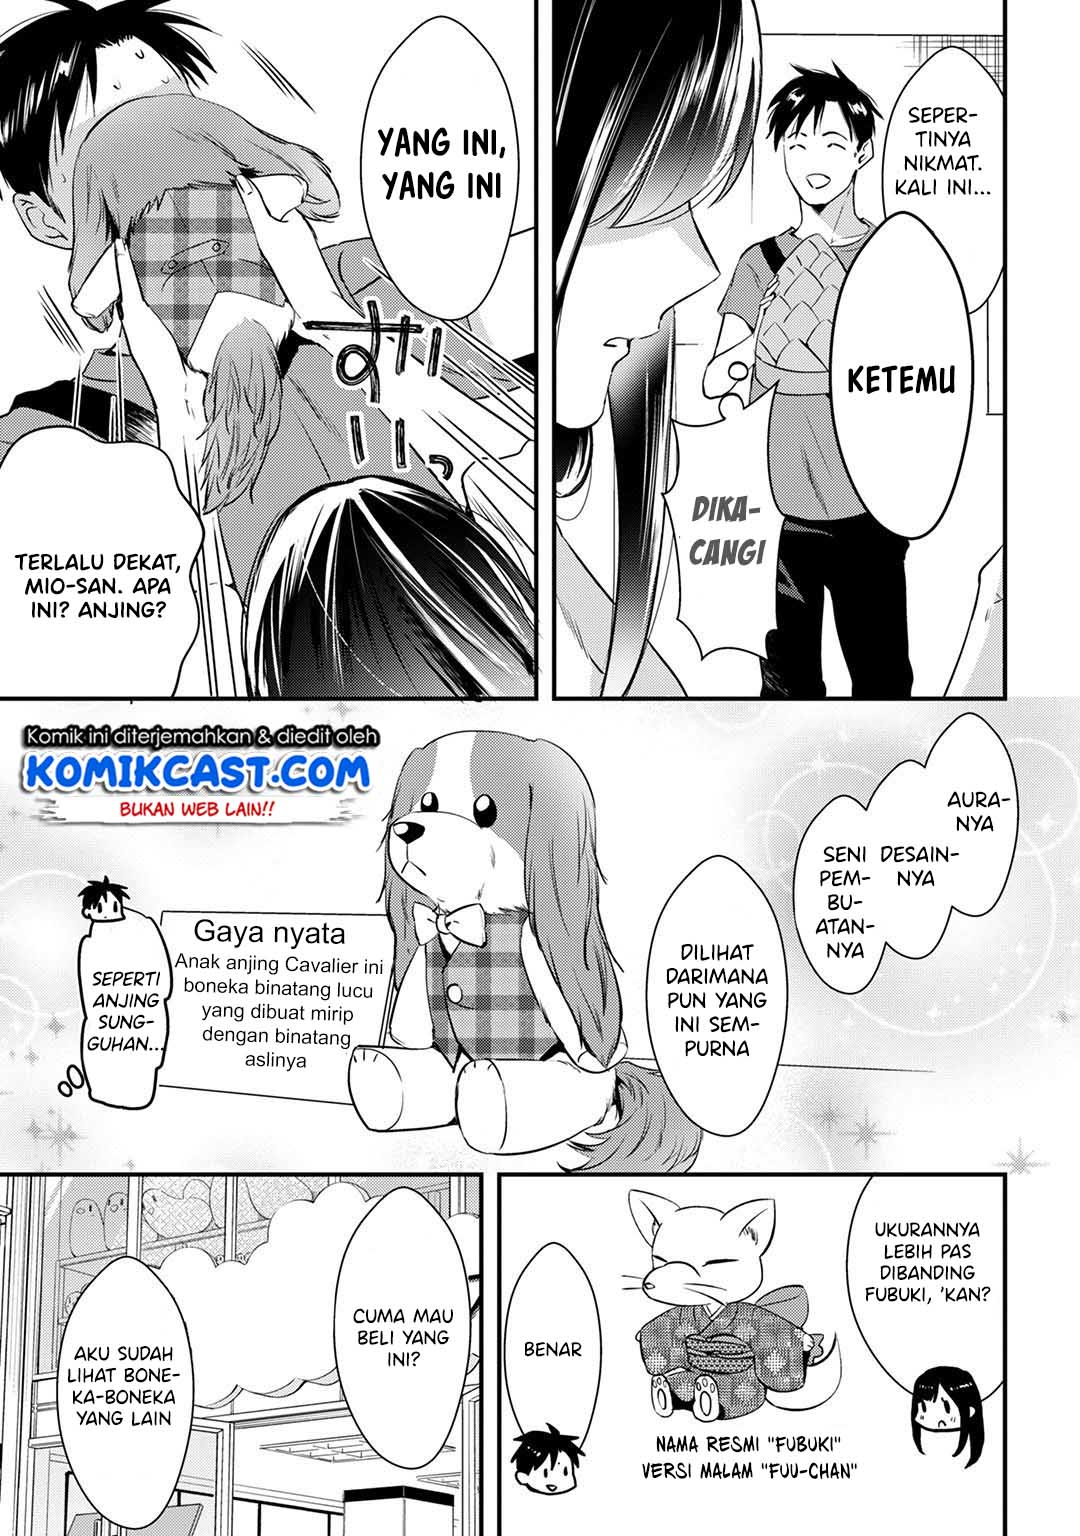 It’s Fun Having a 300,000 yen a Month Job Welcoming Home an Onee-san Who Doesn’t Find Meaning in a Job That Pays Her 500,000 yen a Month Chapter 3